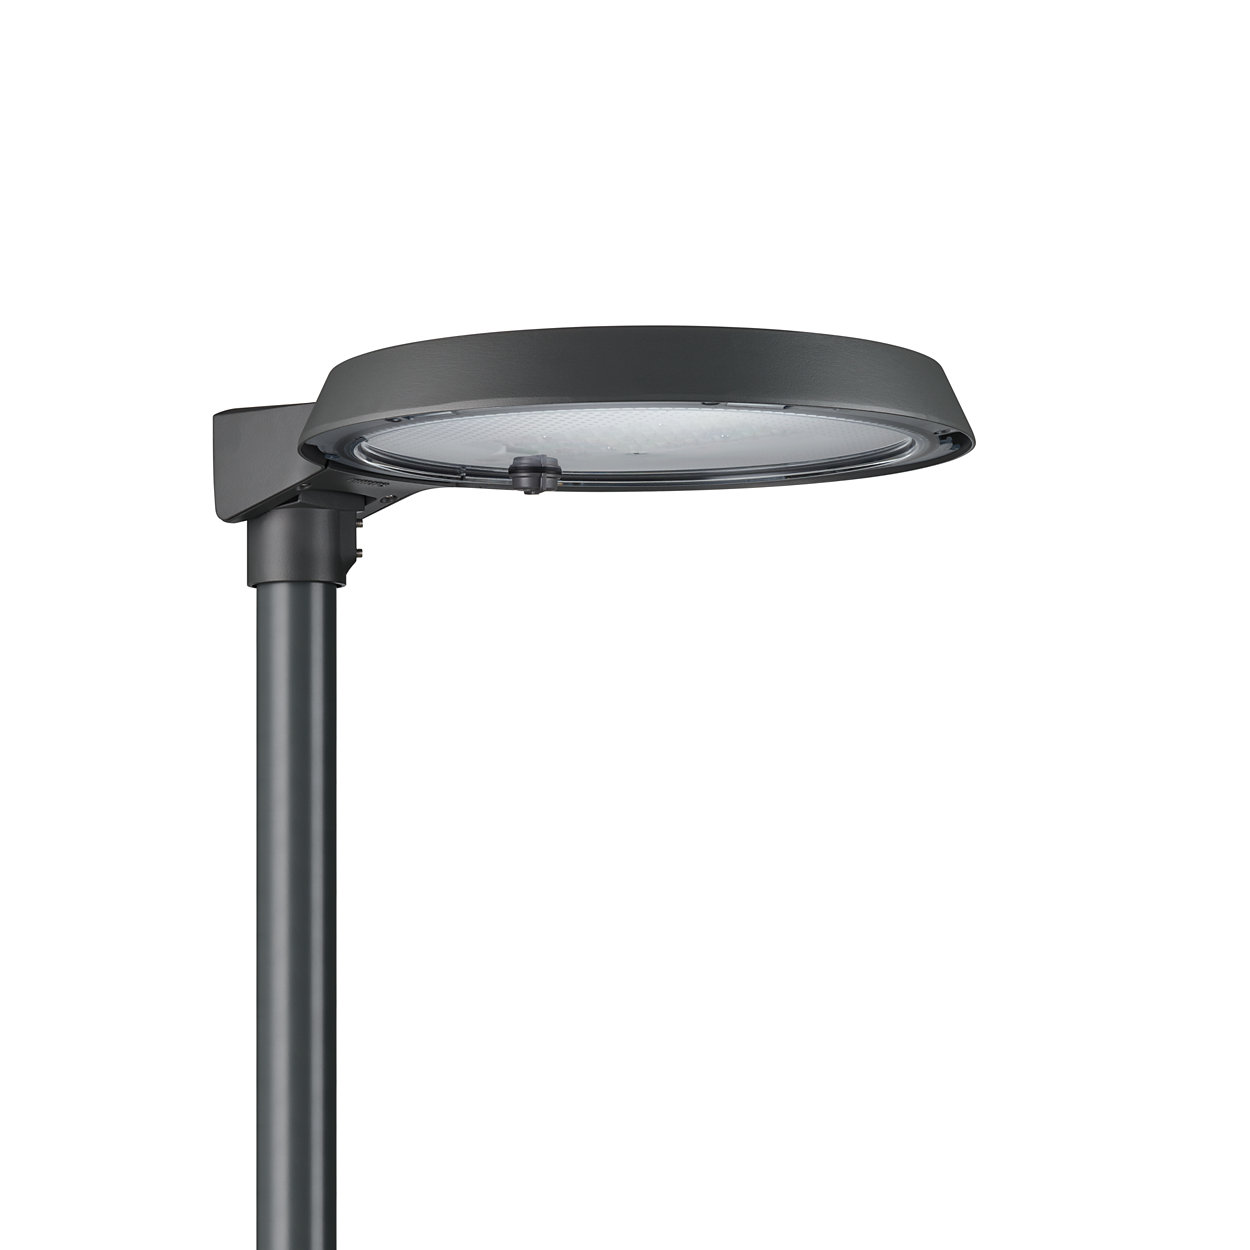 Philips TownTune Asymmetric - Extending the home feel onto the street